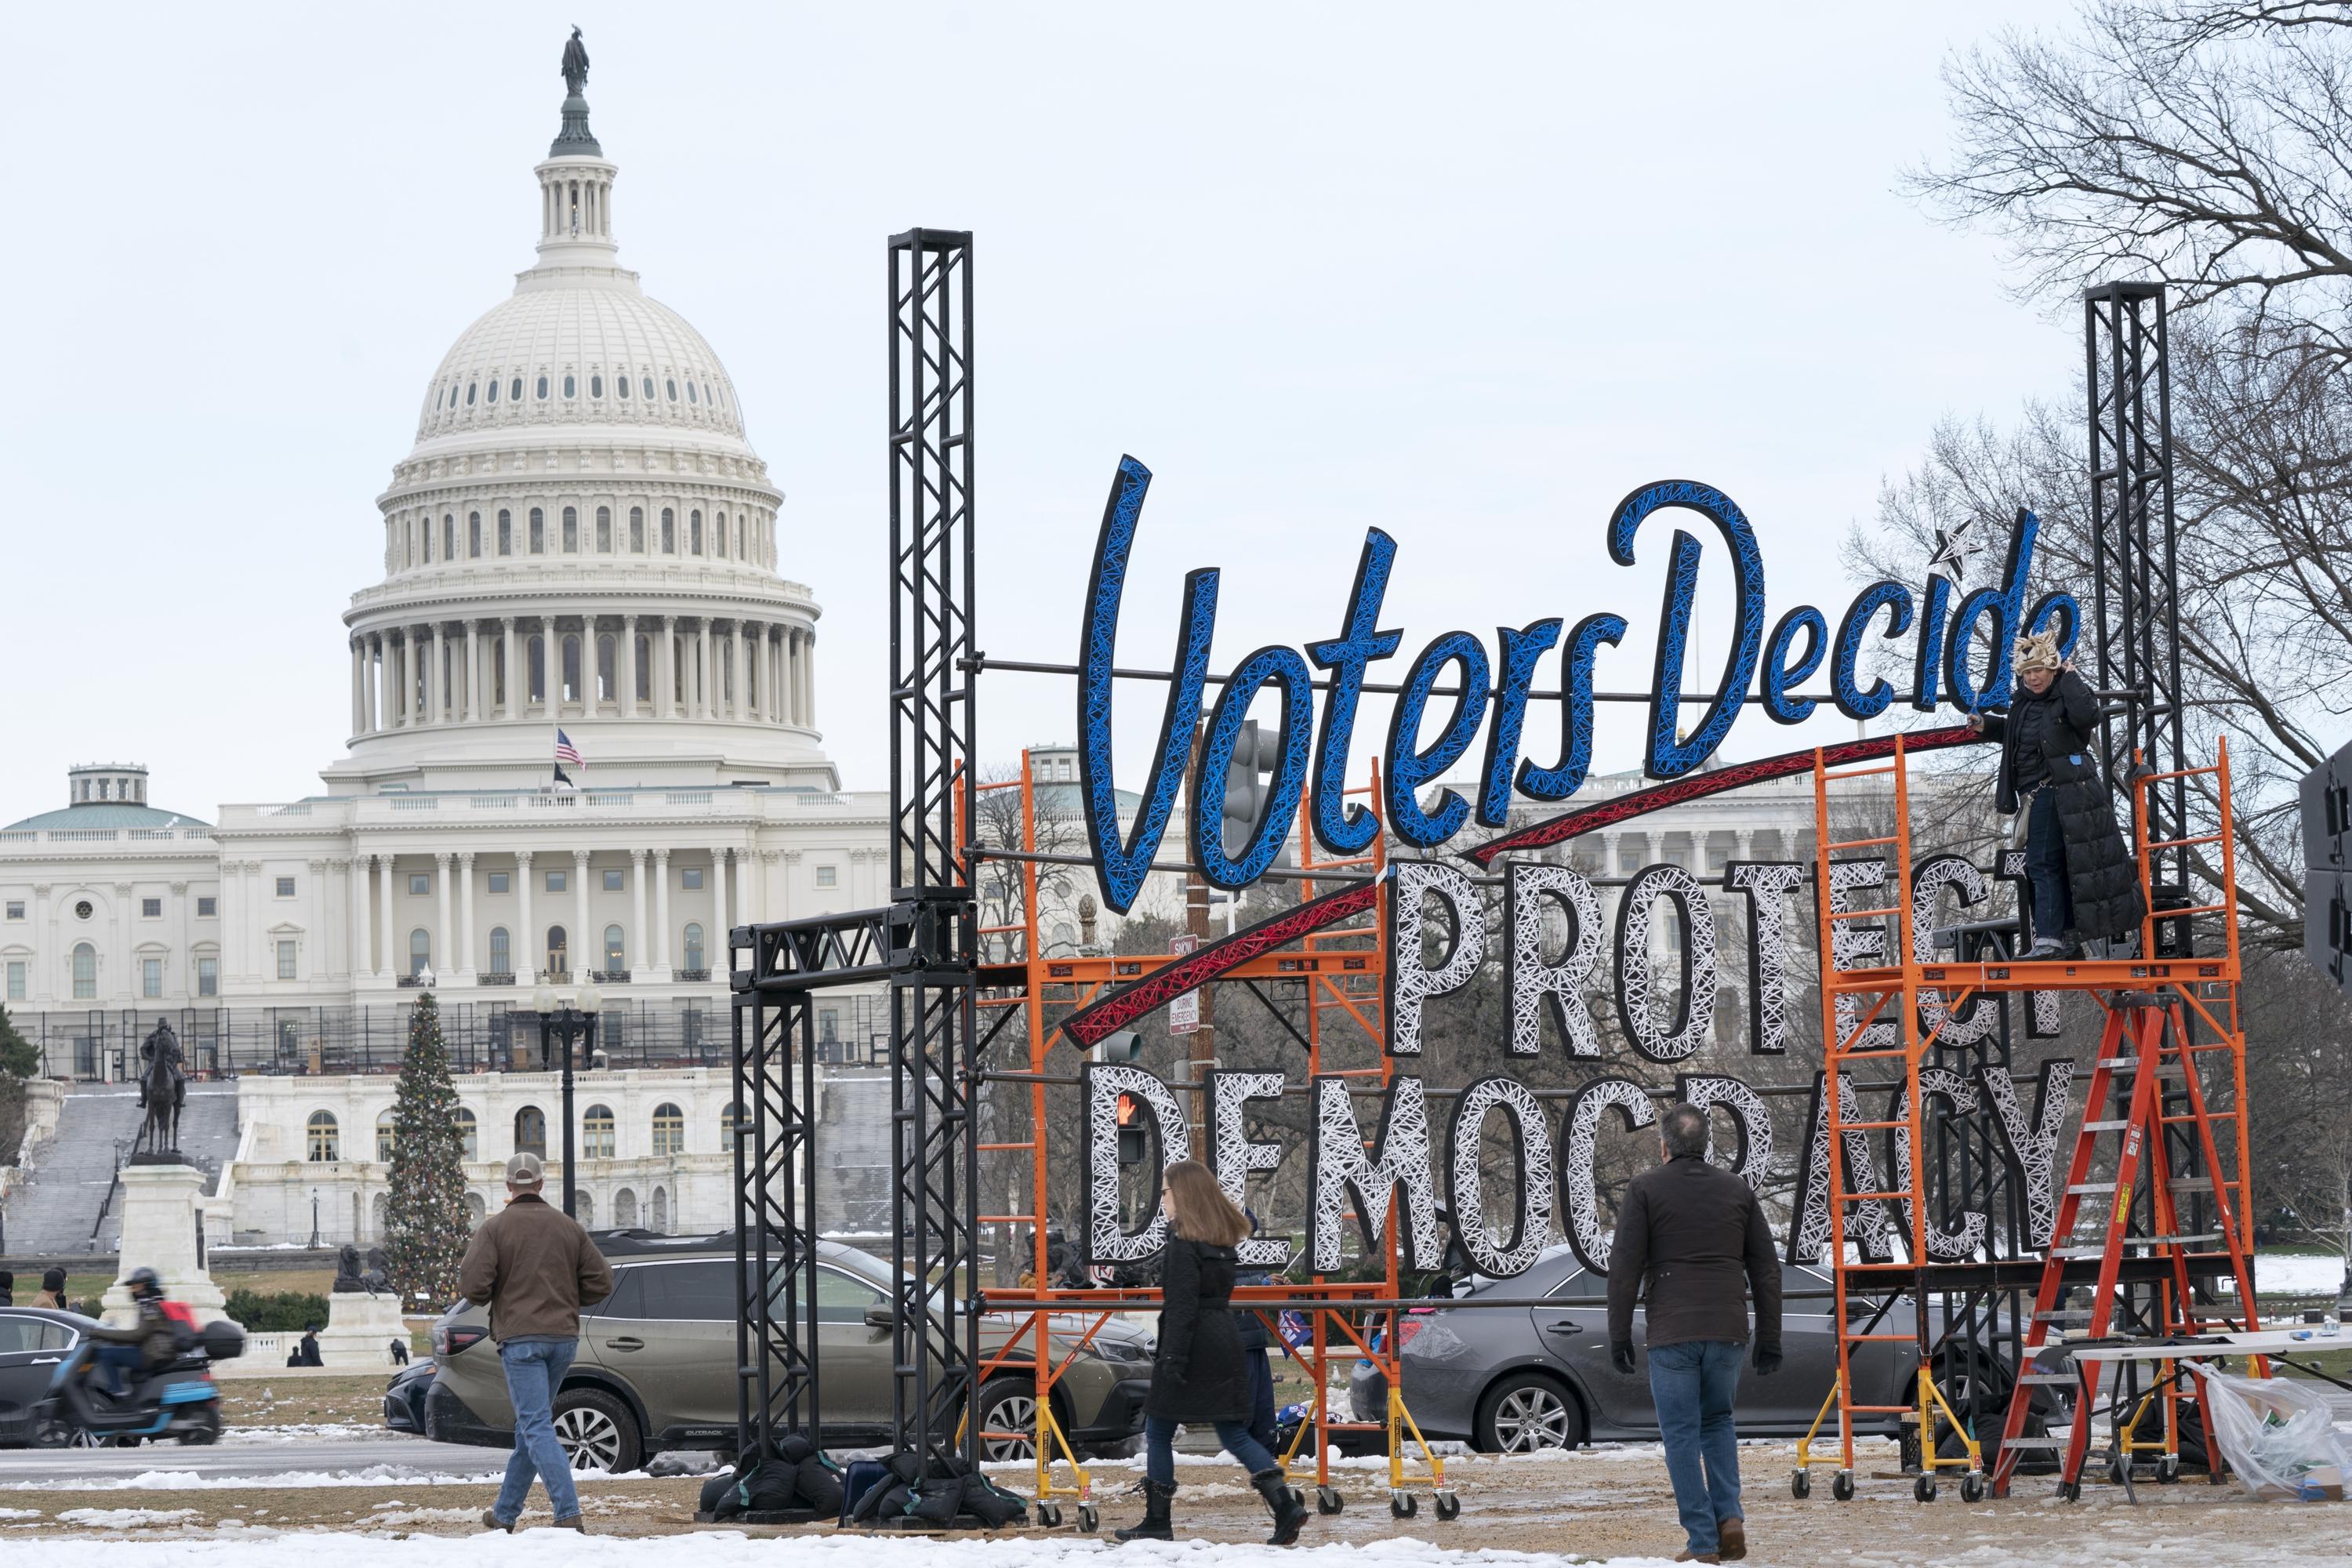 FILE - With the U.S. Capitol in the background, people walk past a sign that says say, "Voters Decide Protect Democracy," Jan. 6, 2022, in Washington. This week’s ballot had an unspoken candidate, American democracy. Two years of relentless attacks on democratic traditions by former President Donald Trump and his allies left the country's future in doubt, and voters responded. Many of the candidates who supported the lie that Trump won the 2020 election lost races that could have put them in a position to influence future elections. But the conditions that threatened democracy's demise remain, and Americans view them from very different perspectives. (AP Photo/Jacquelyn Martin, File)